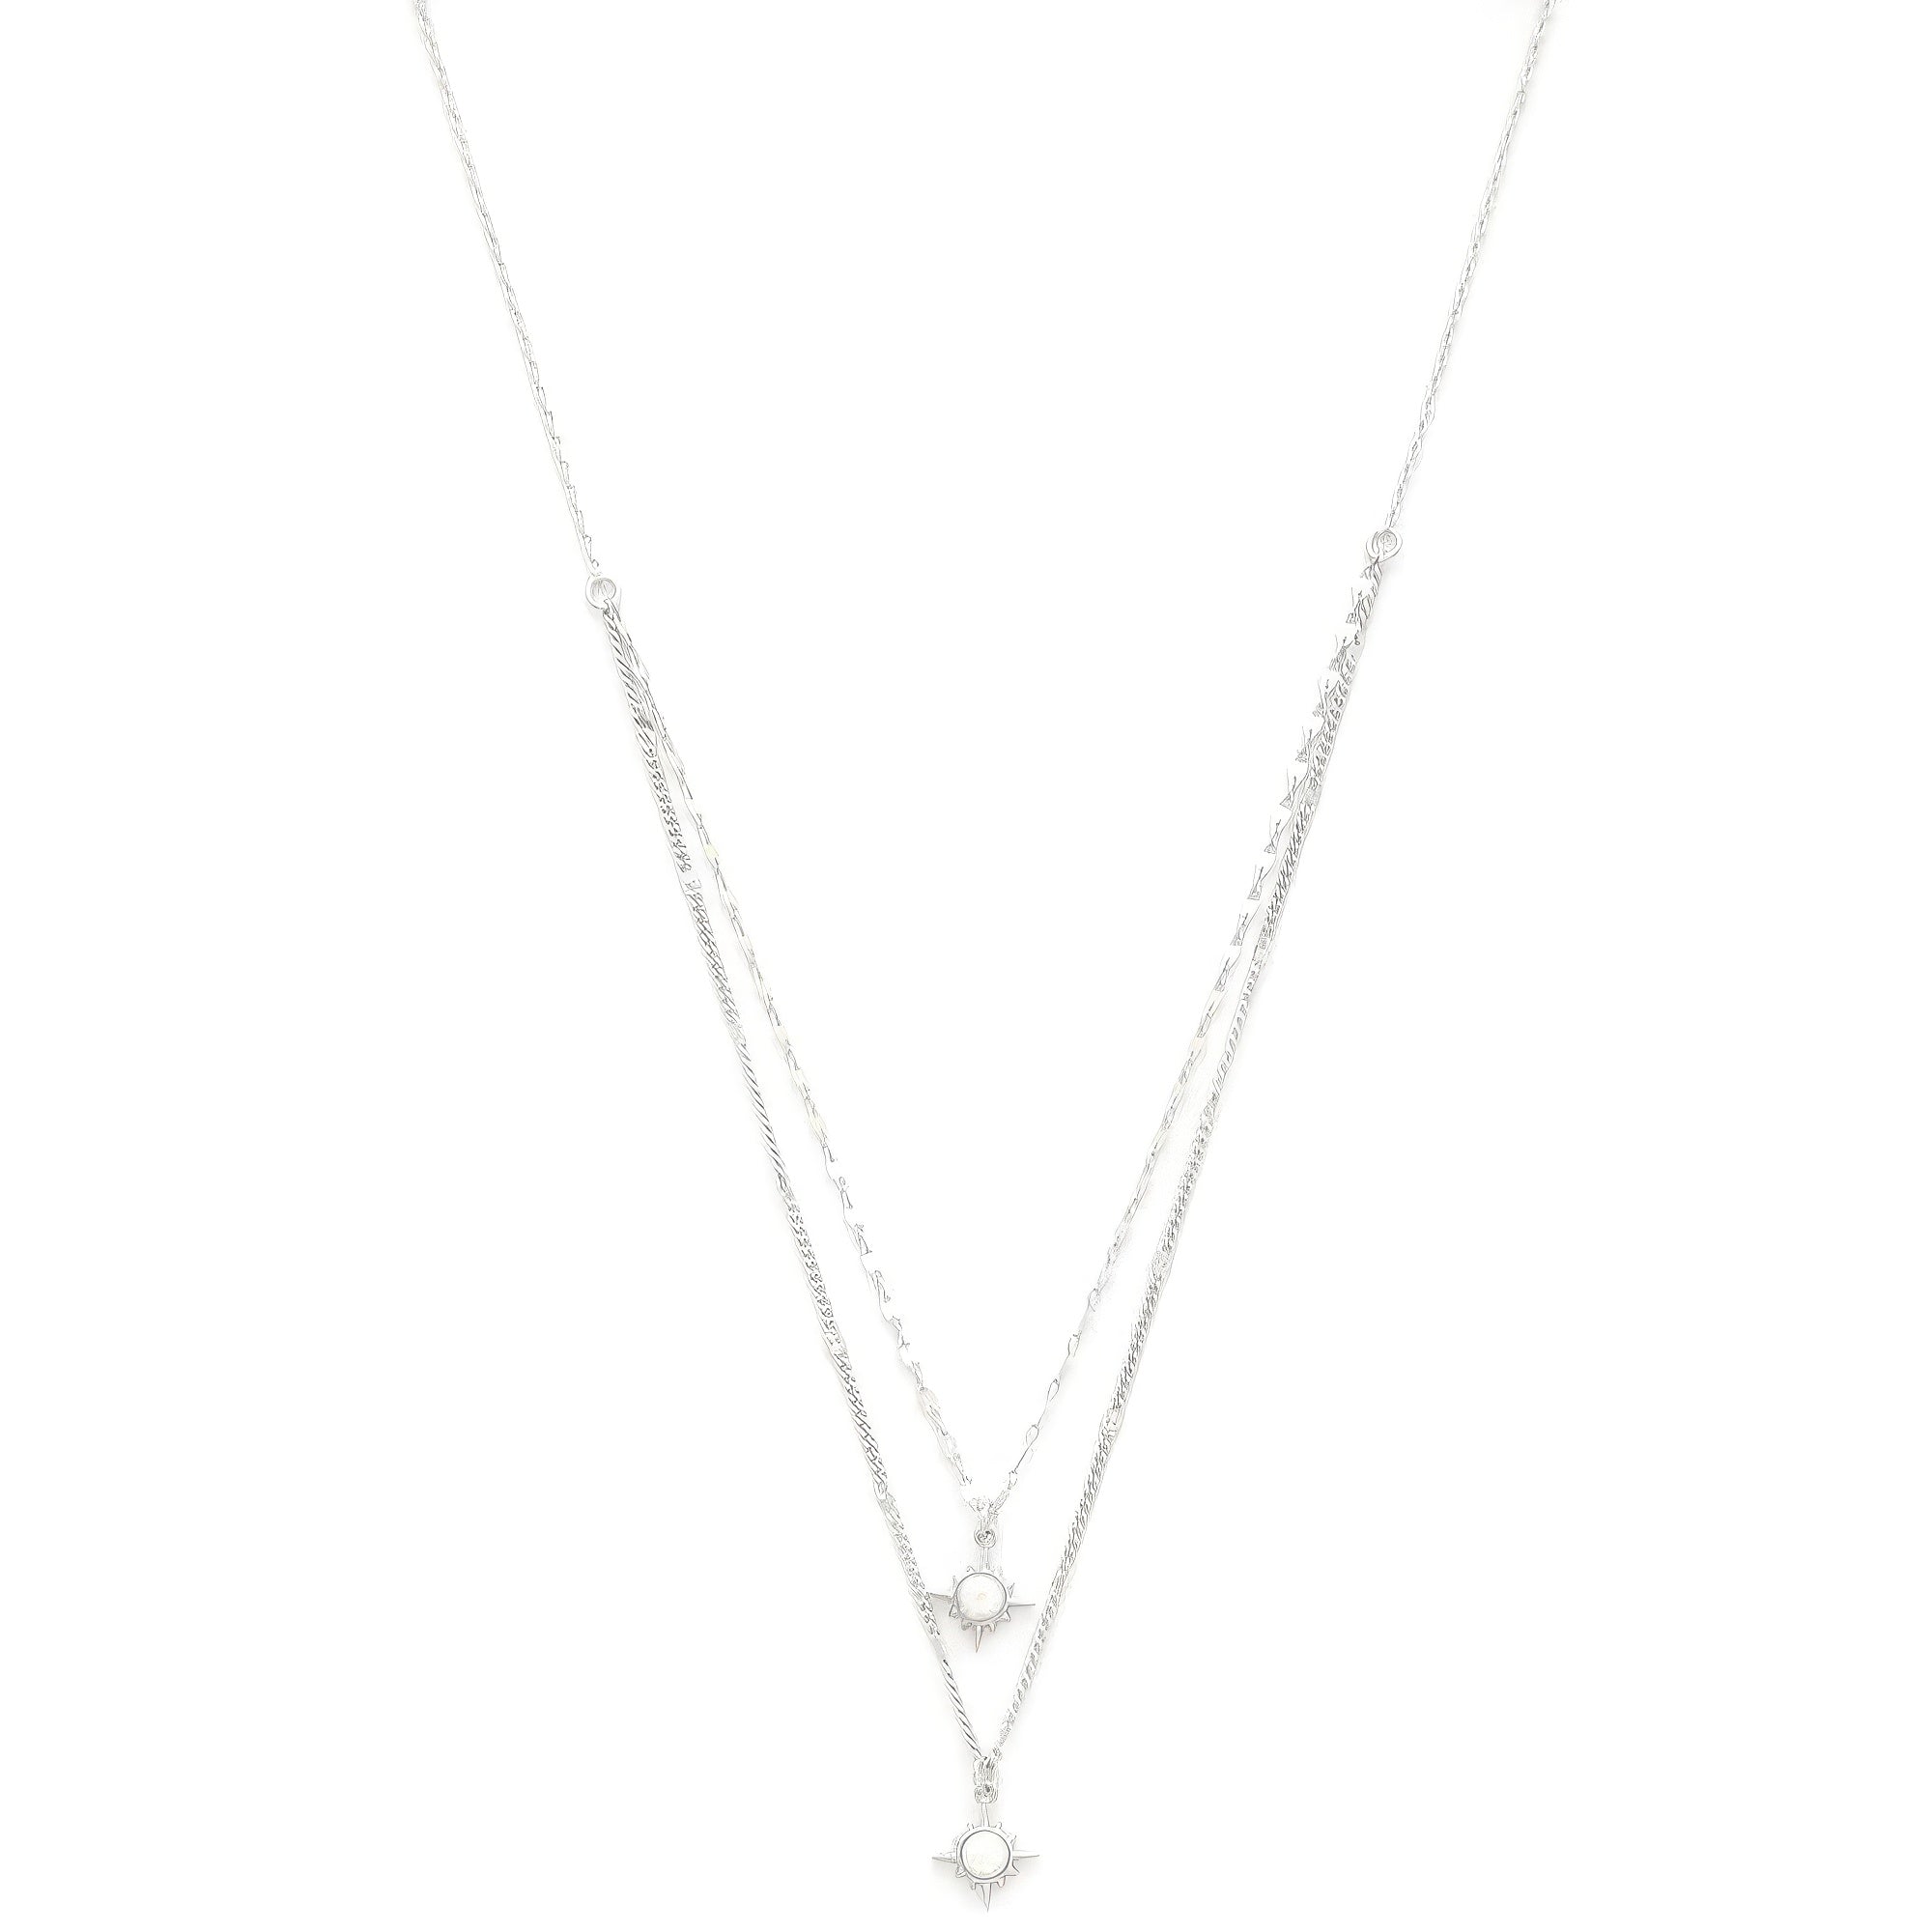 Double Star Crystal Layered Necklace